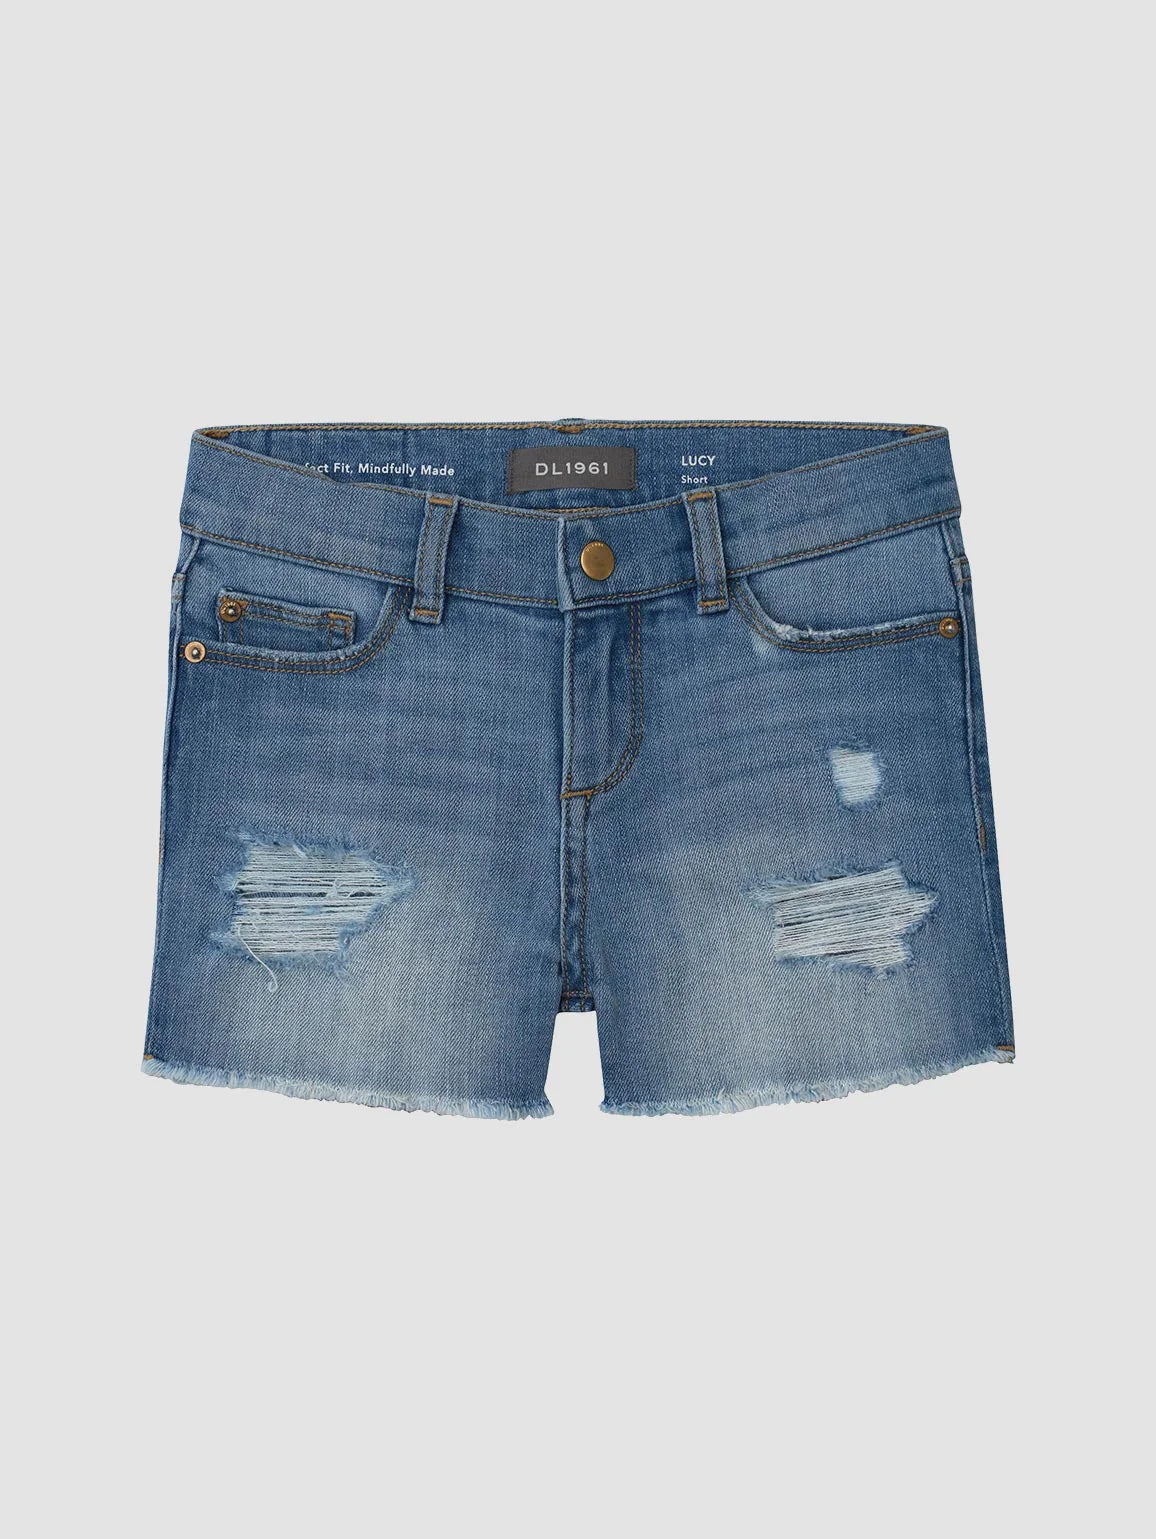 Lucy Shorts Cut Off - Frost Distressed